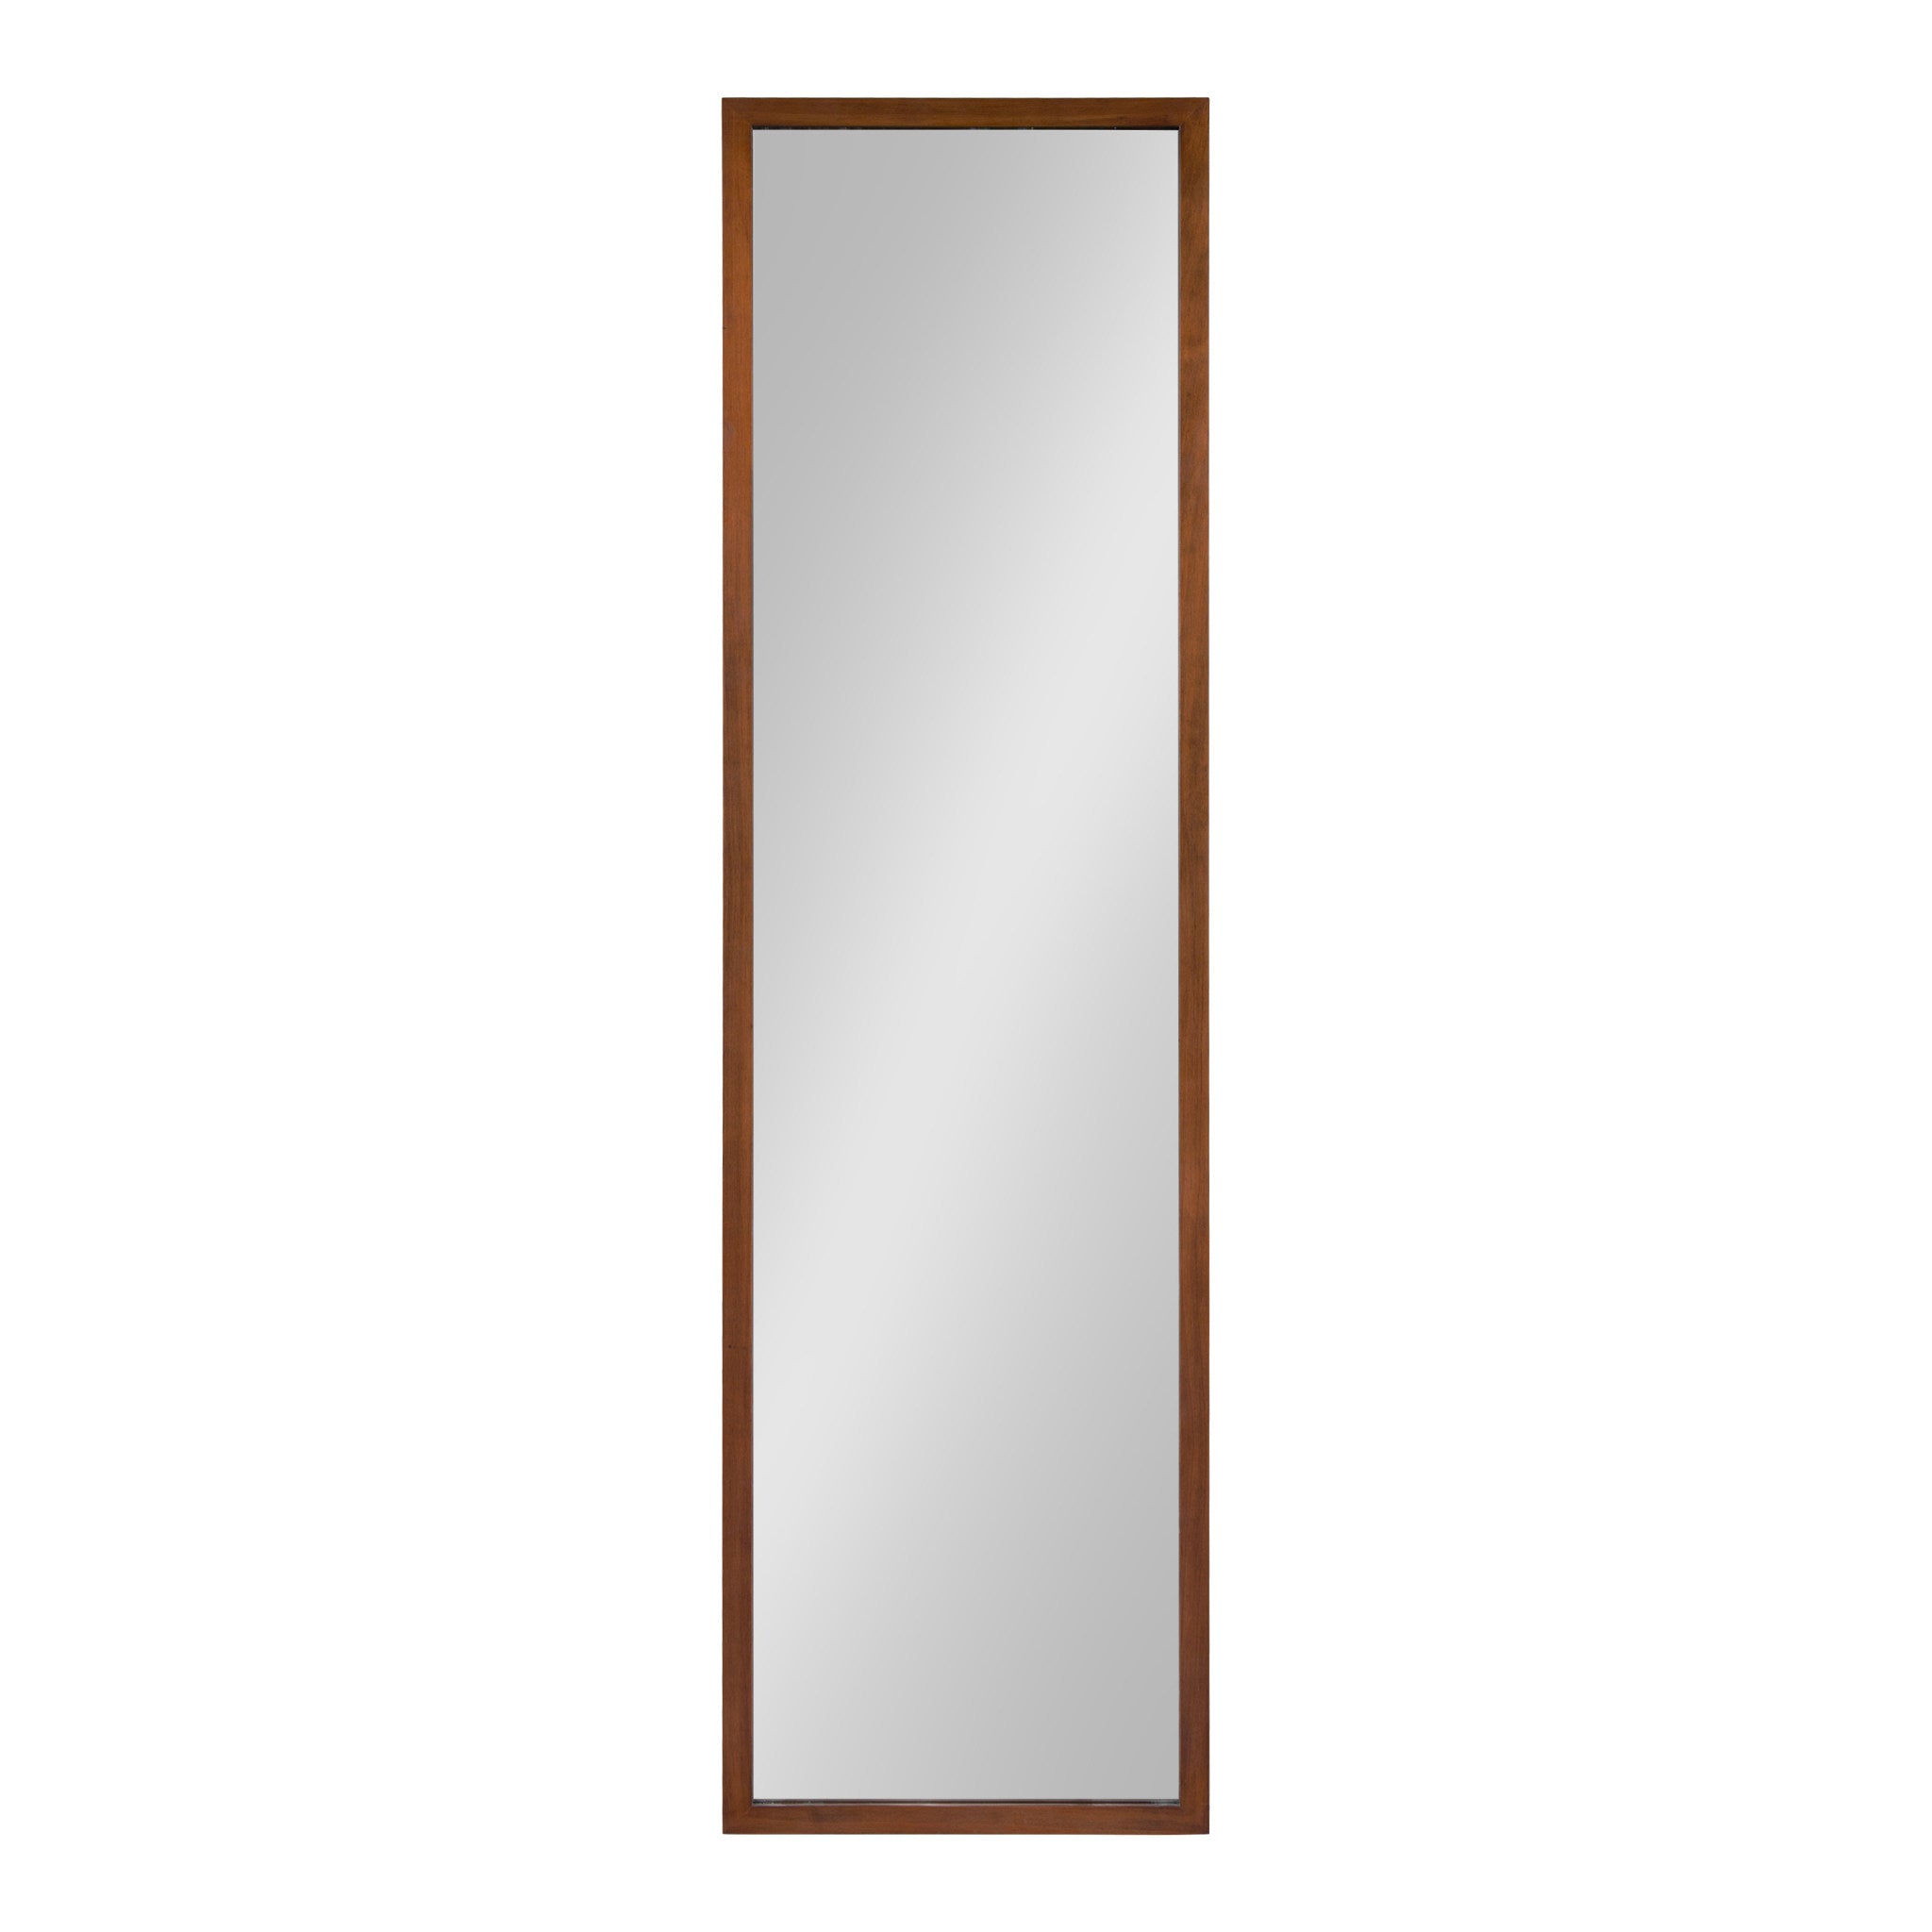 Housoutil Full Length Mirror Stand Artwork Display Stand Picture